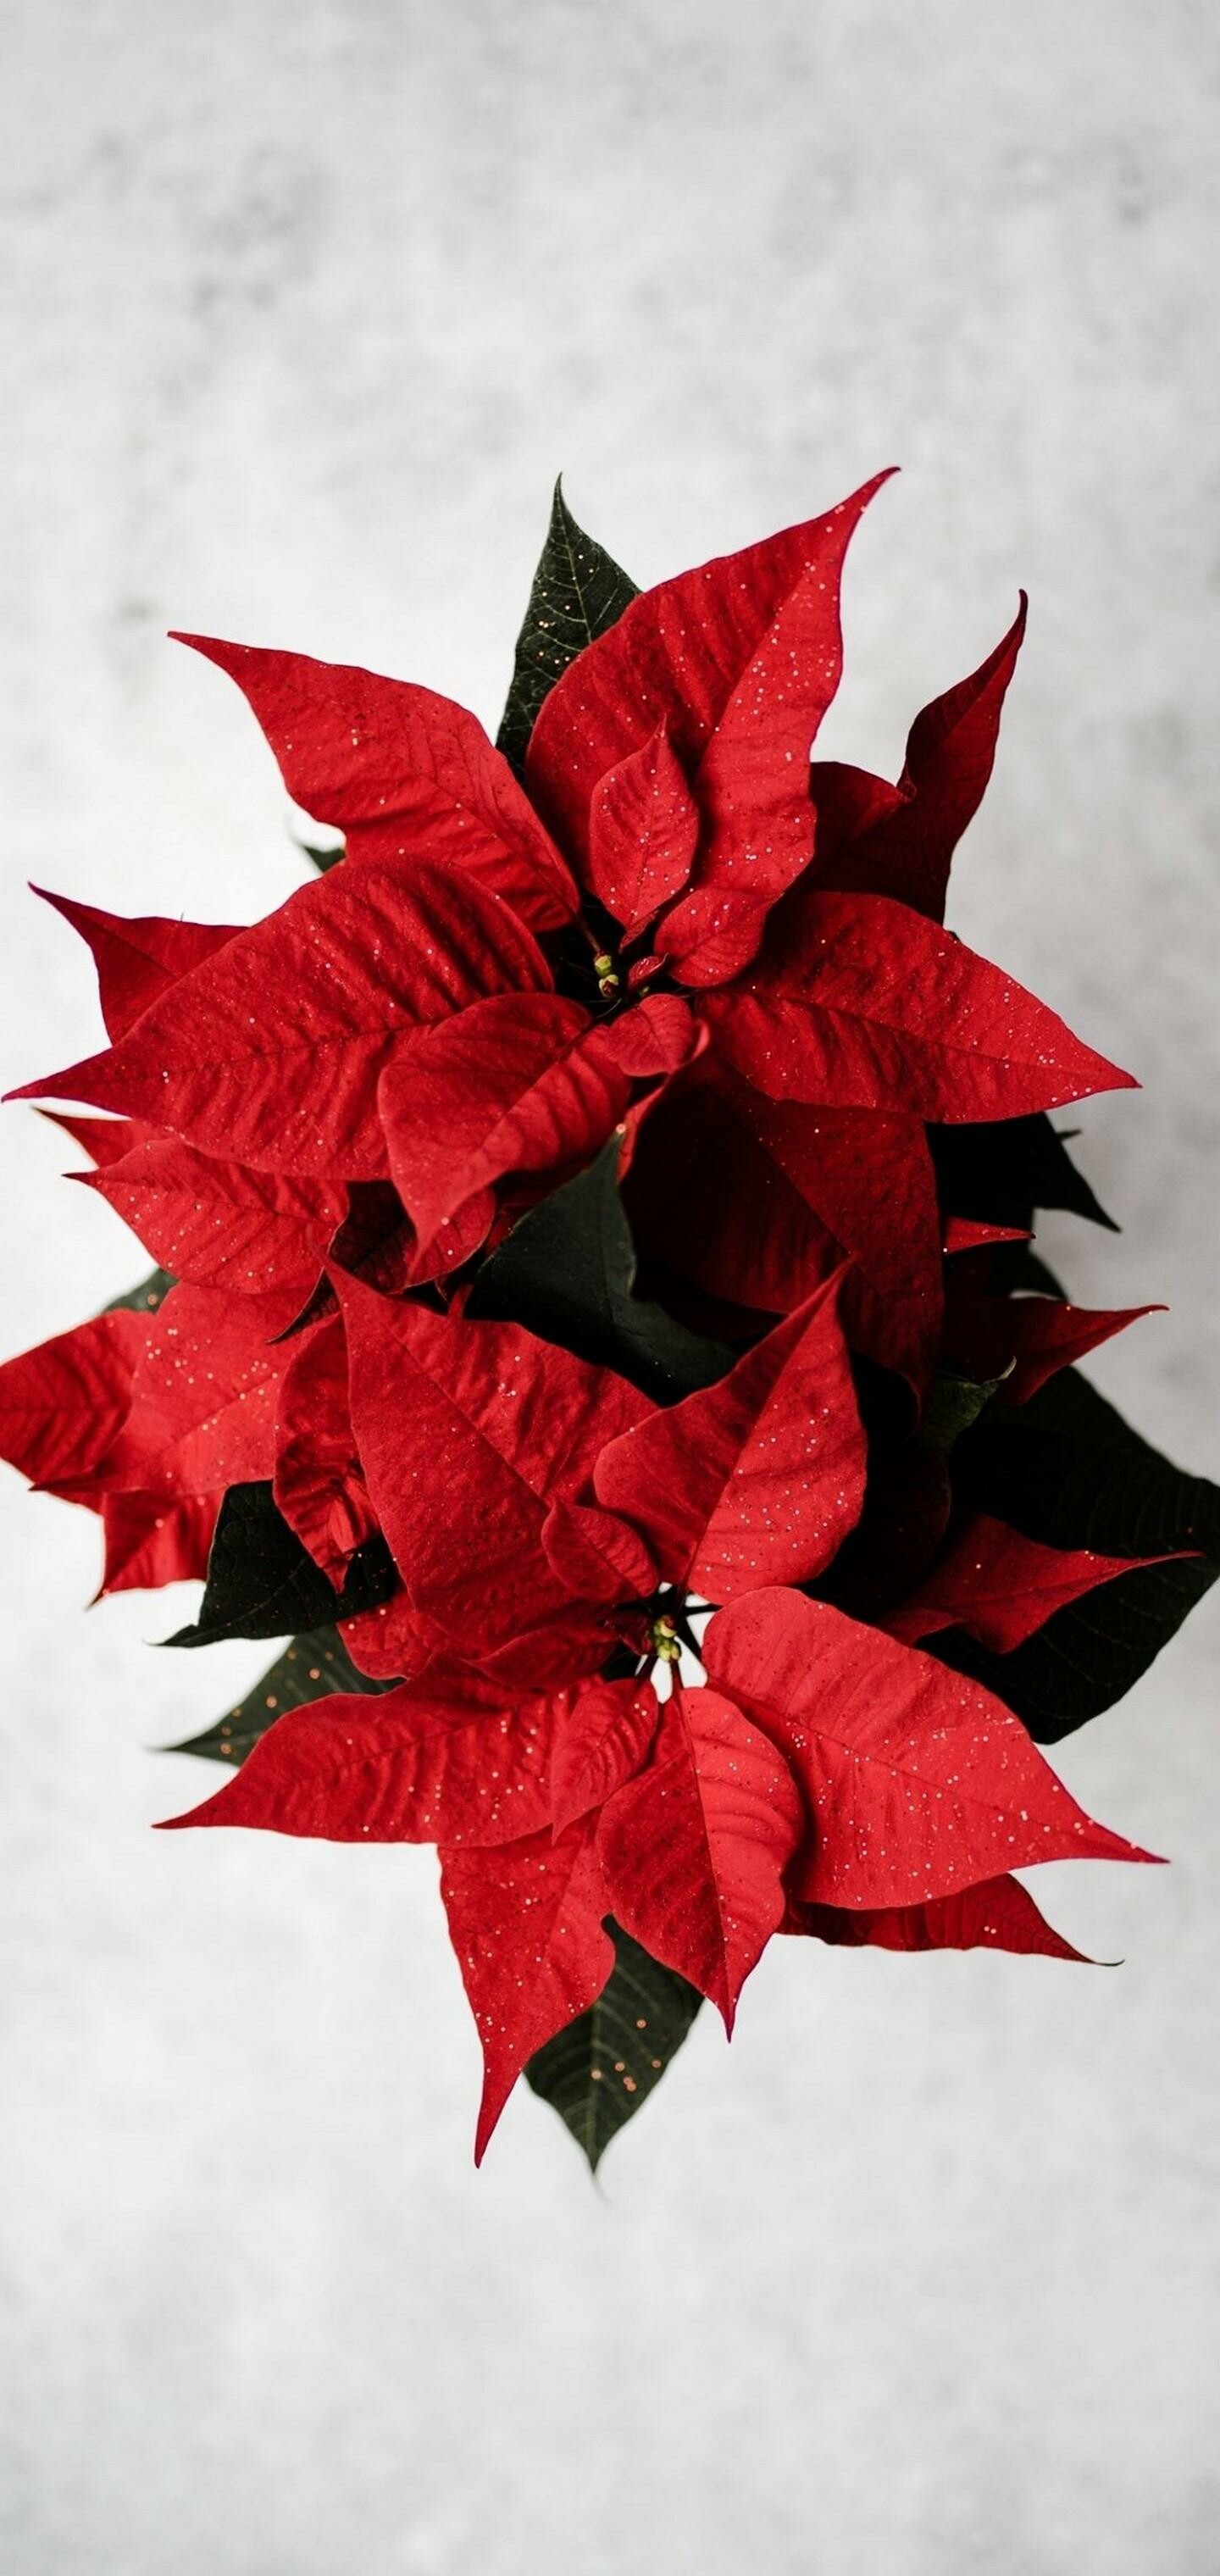 Poinsettia: Became associated with the Christmas holiday and are popular seasonal decorations. 1440x3040 HD Wallpaper.